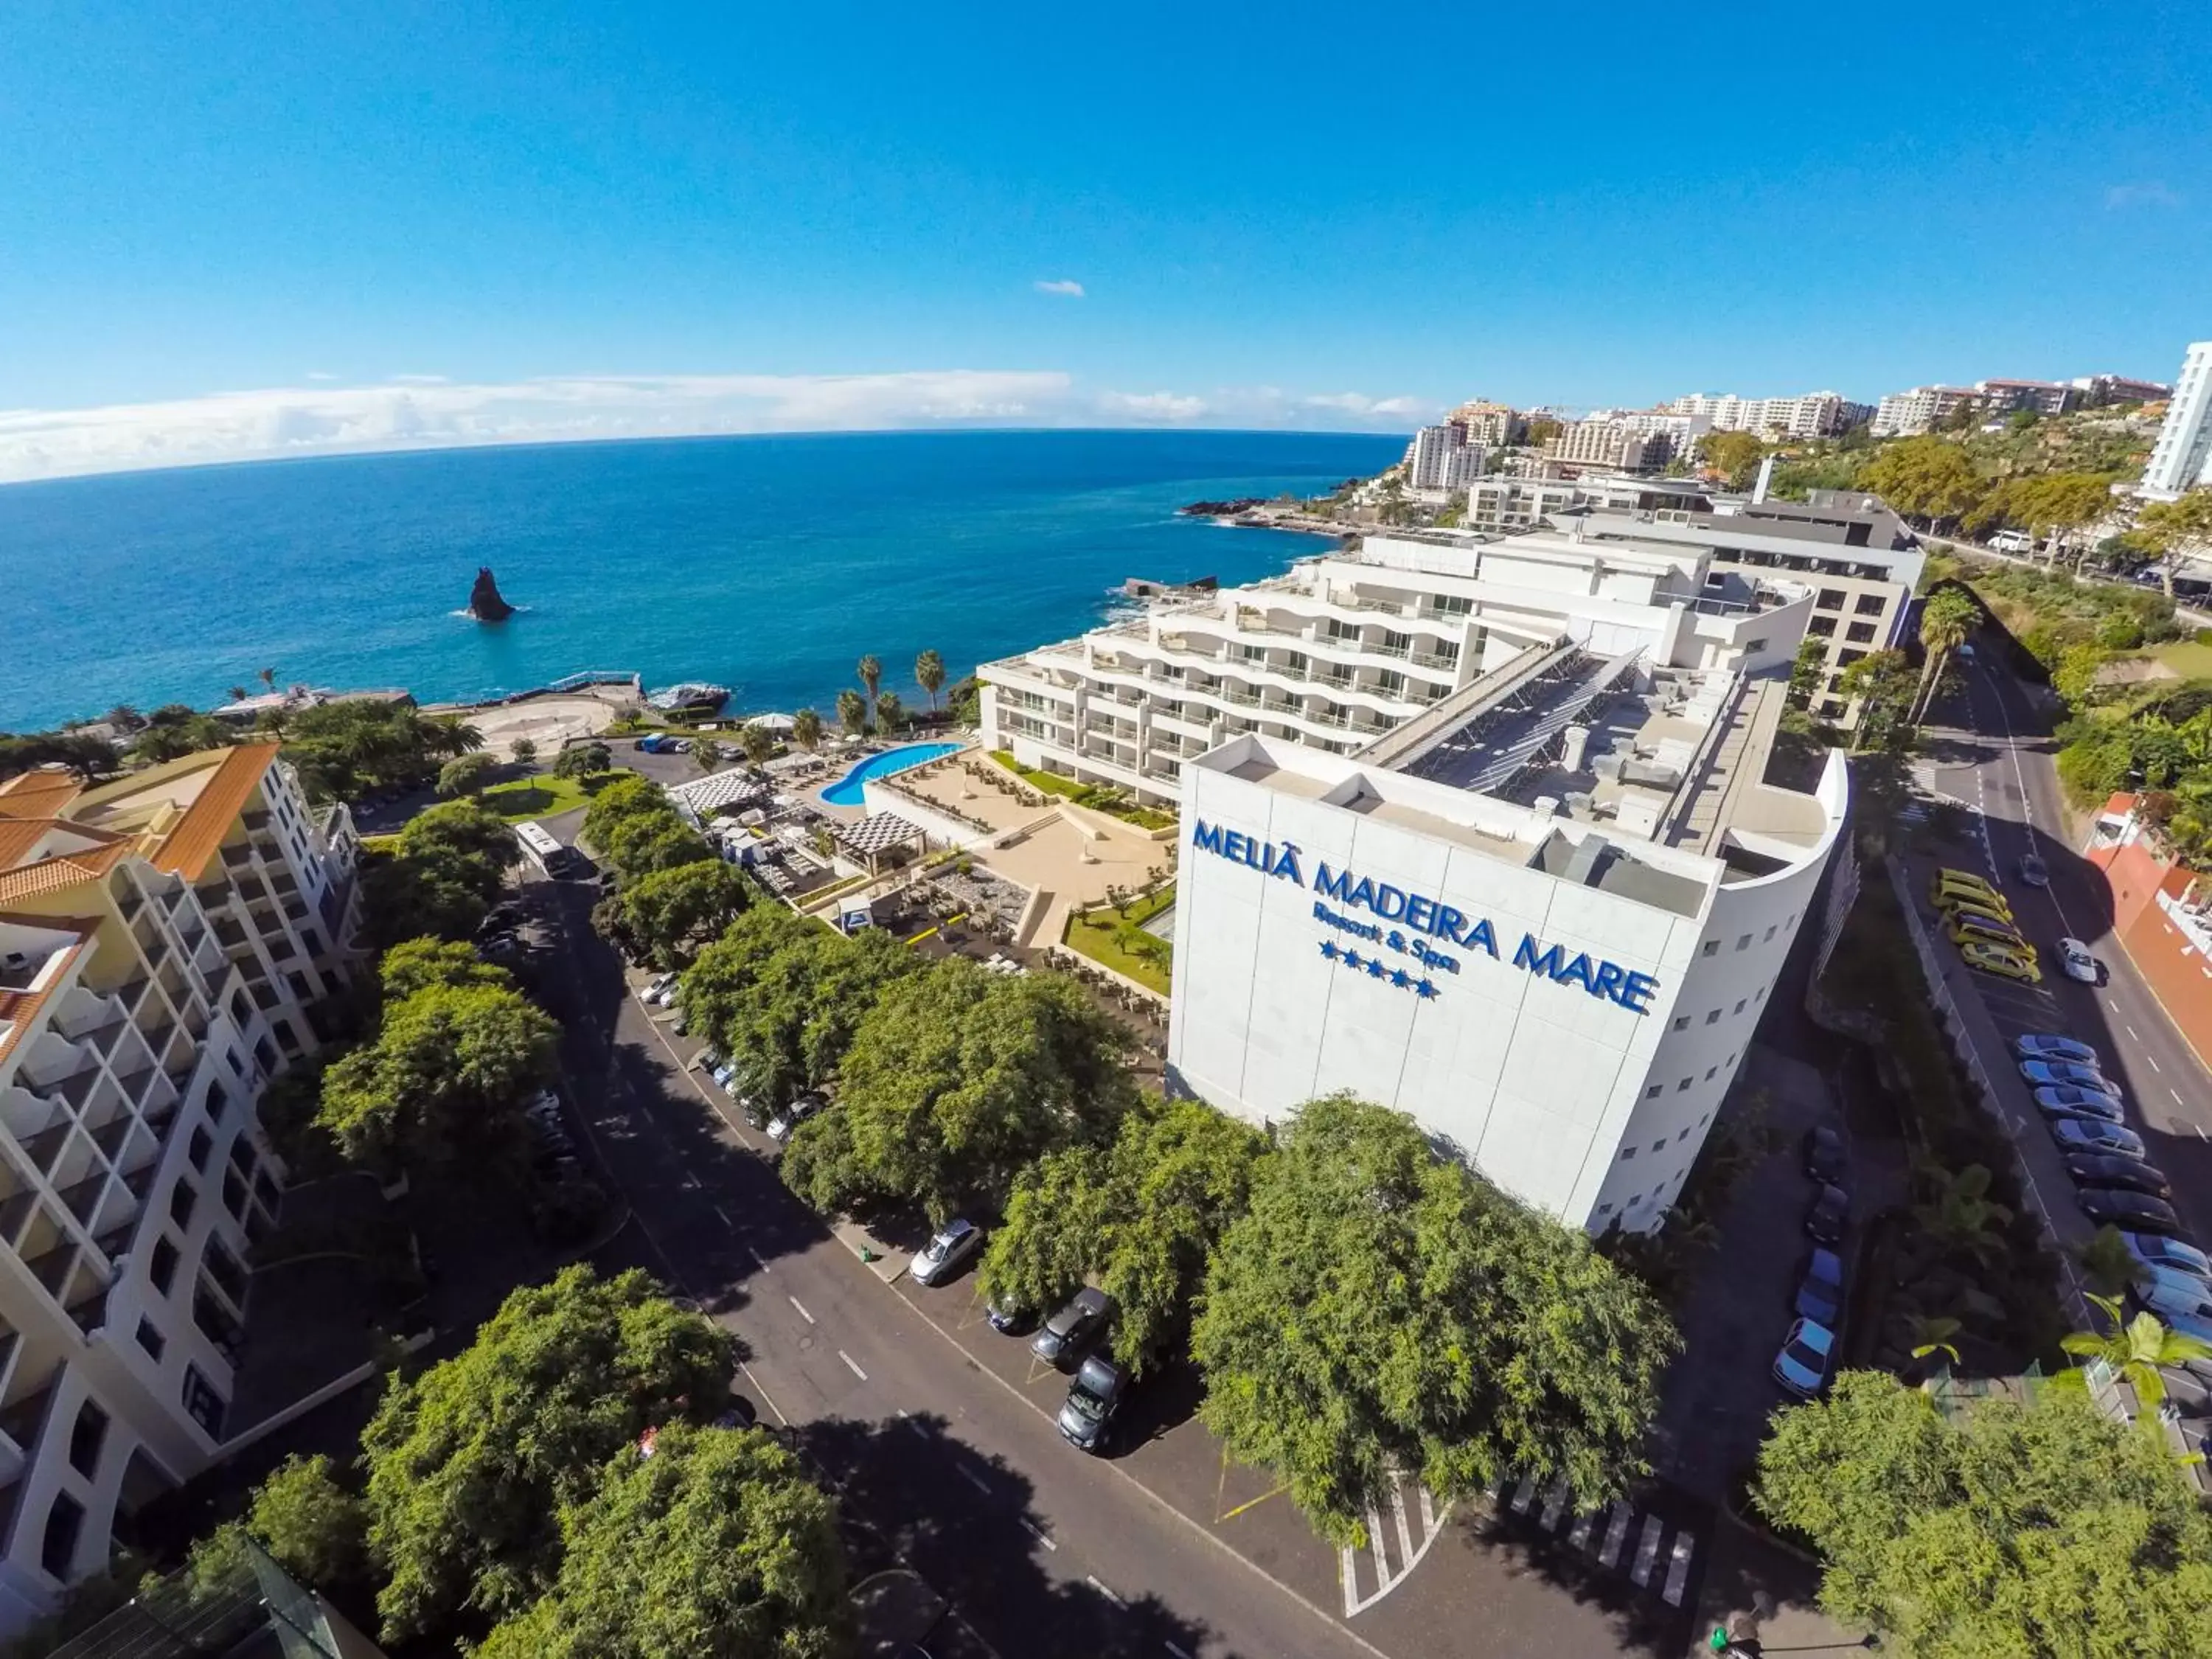 Off site, Bird's-eye View in Melia Madeira Mare